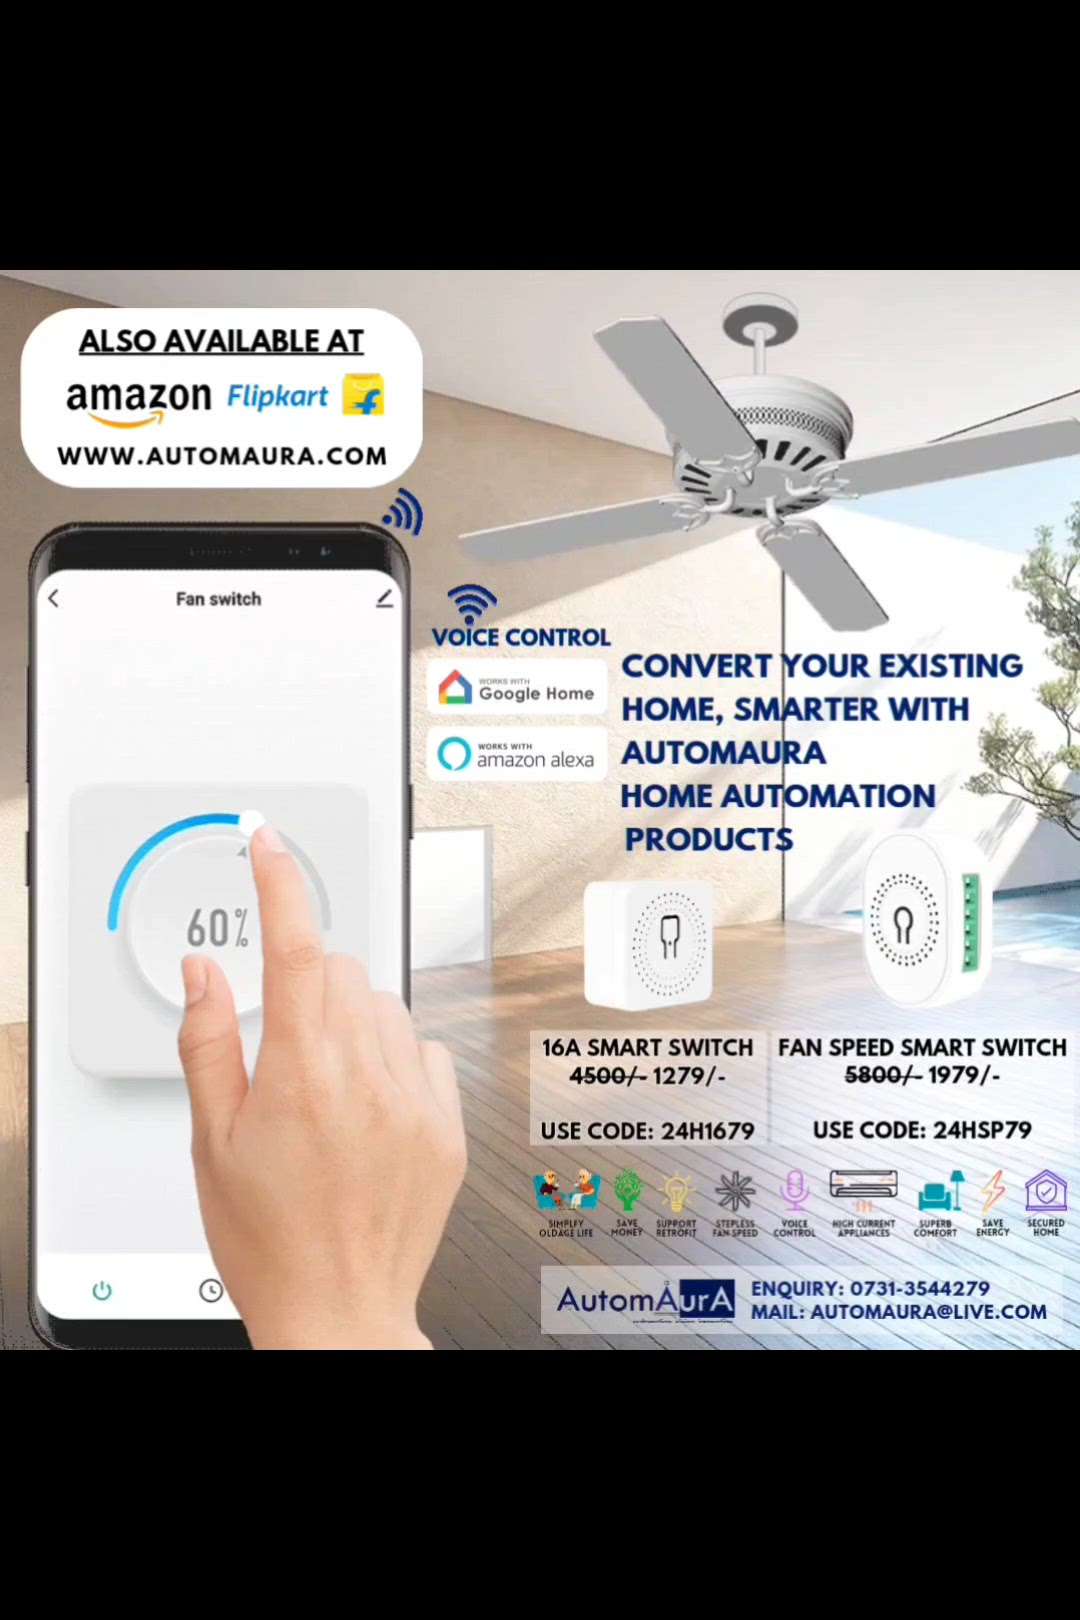 Automaura Home Automation Products, call:07313544279 or visit www.automaura.com